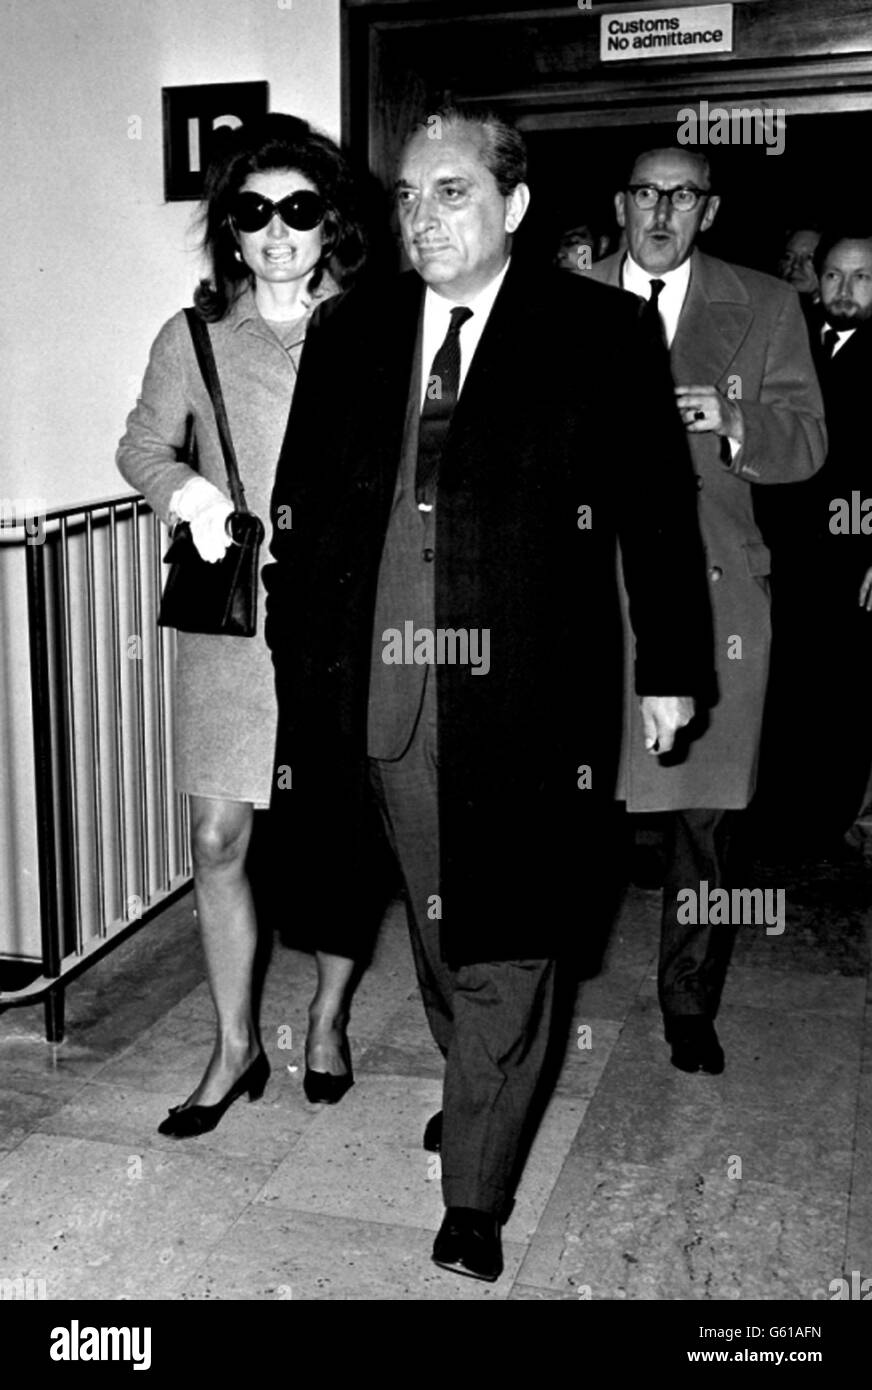 Mr Aristotle Onassis, and his wife, formerly Jacqueline Kennedy, arrive at Heathrow Airport from Geneva. Stock Photo